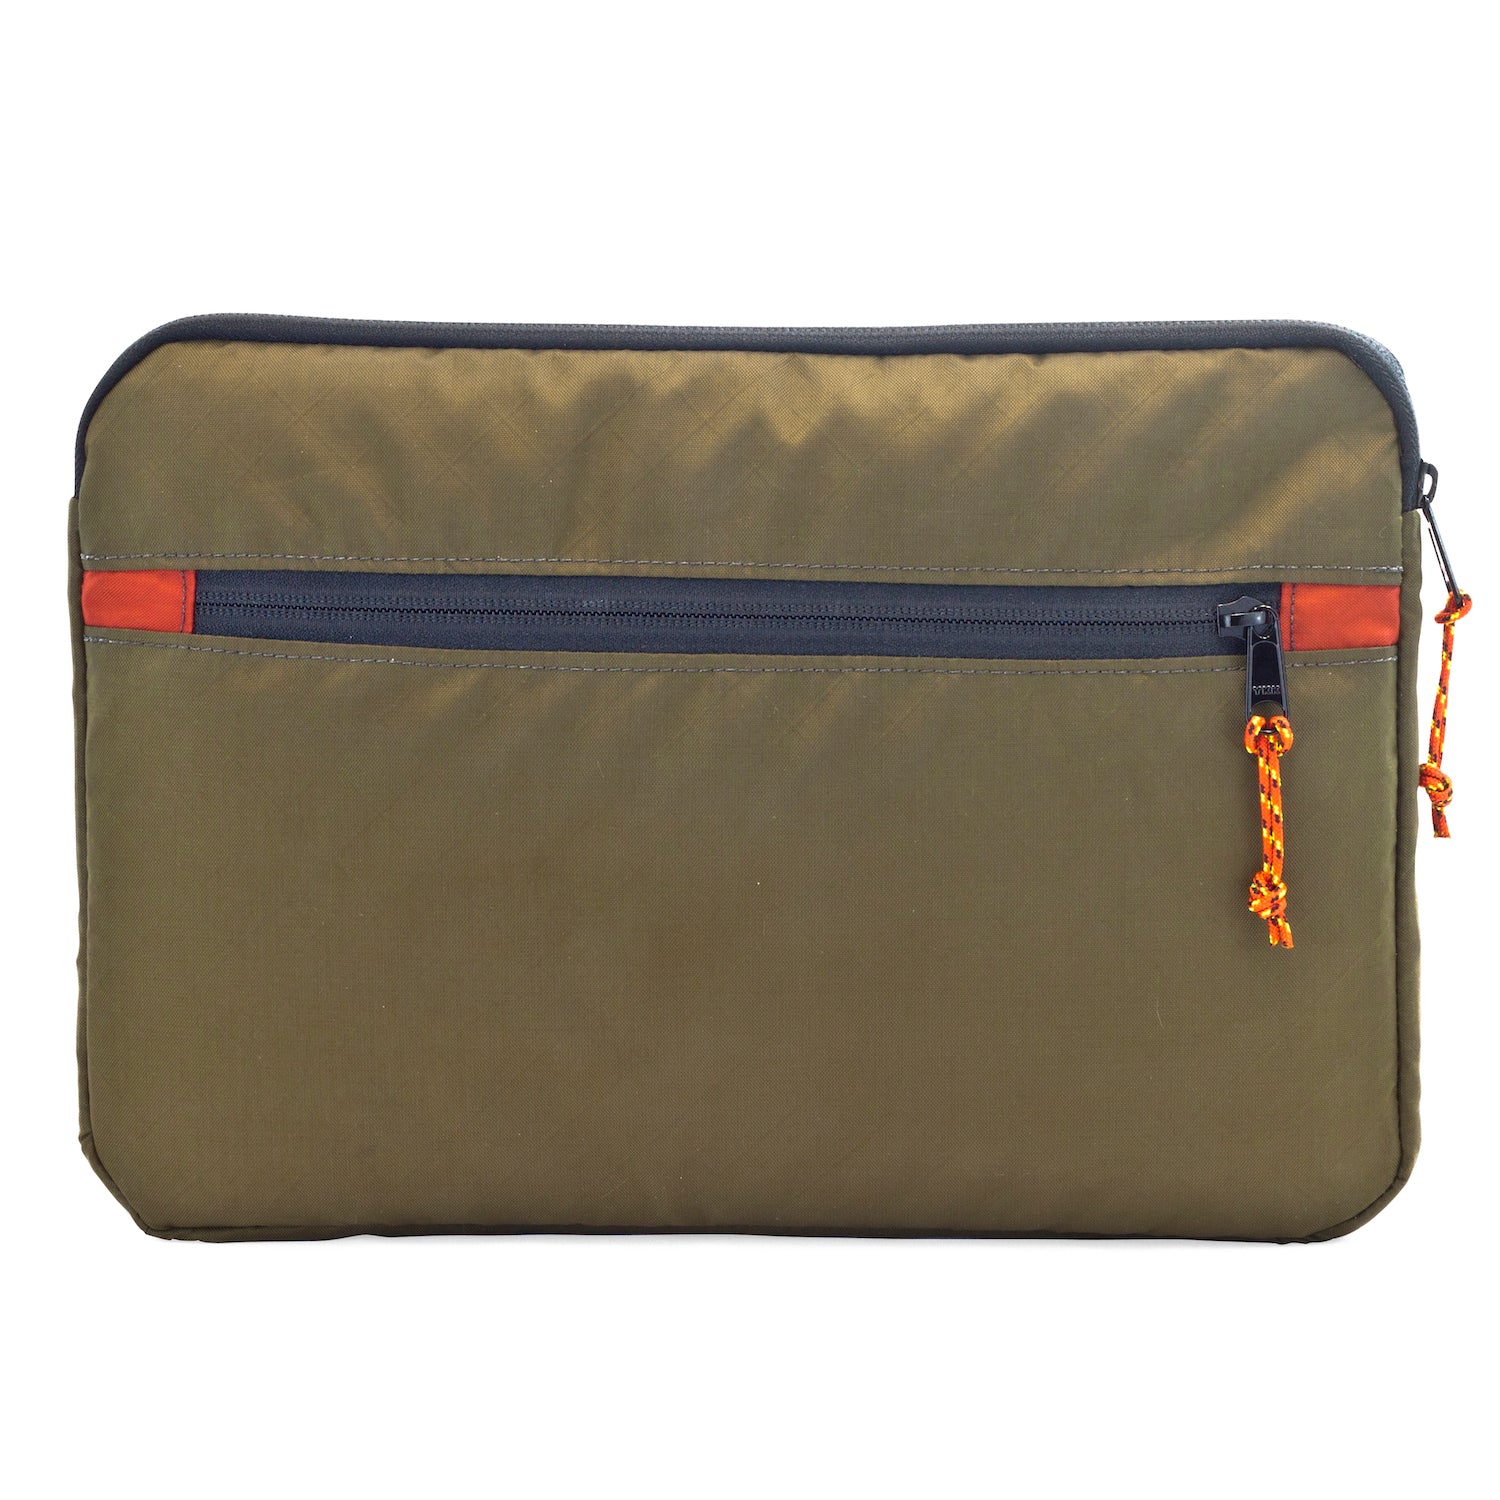 Flowfold Ally - Laptop Case Limited: Olive/Brick Red / 13 inch